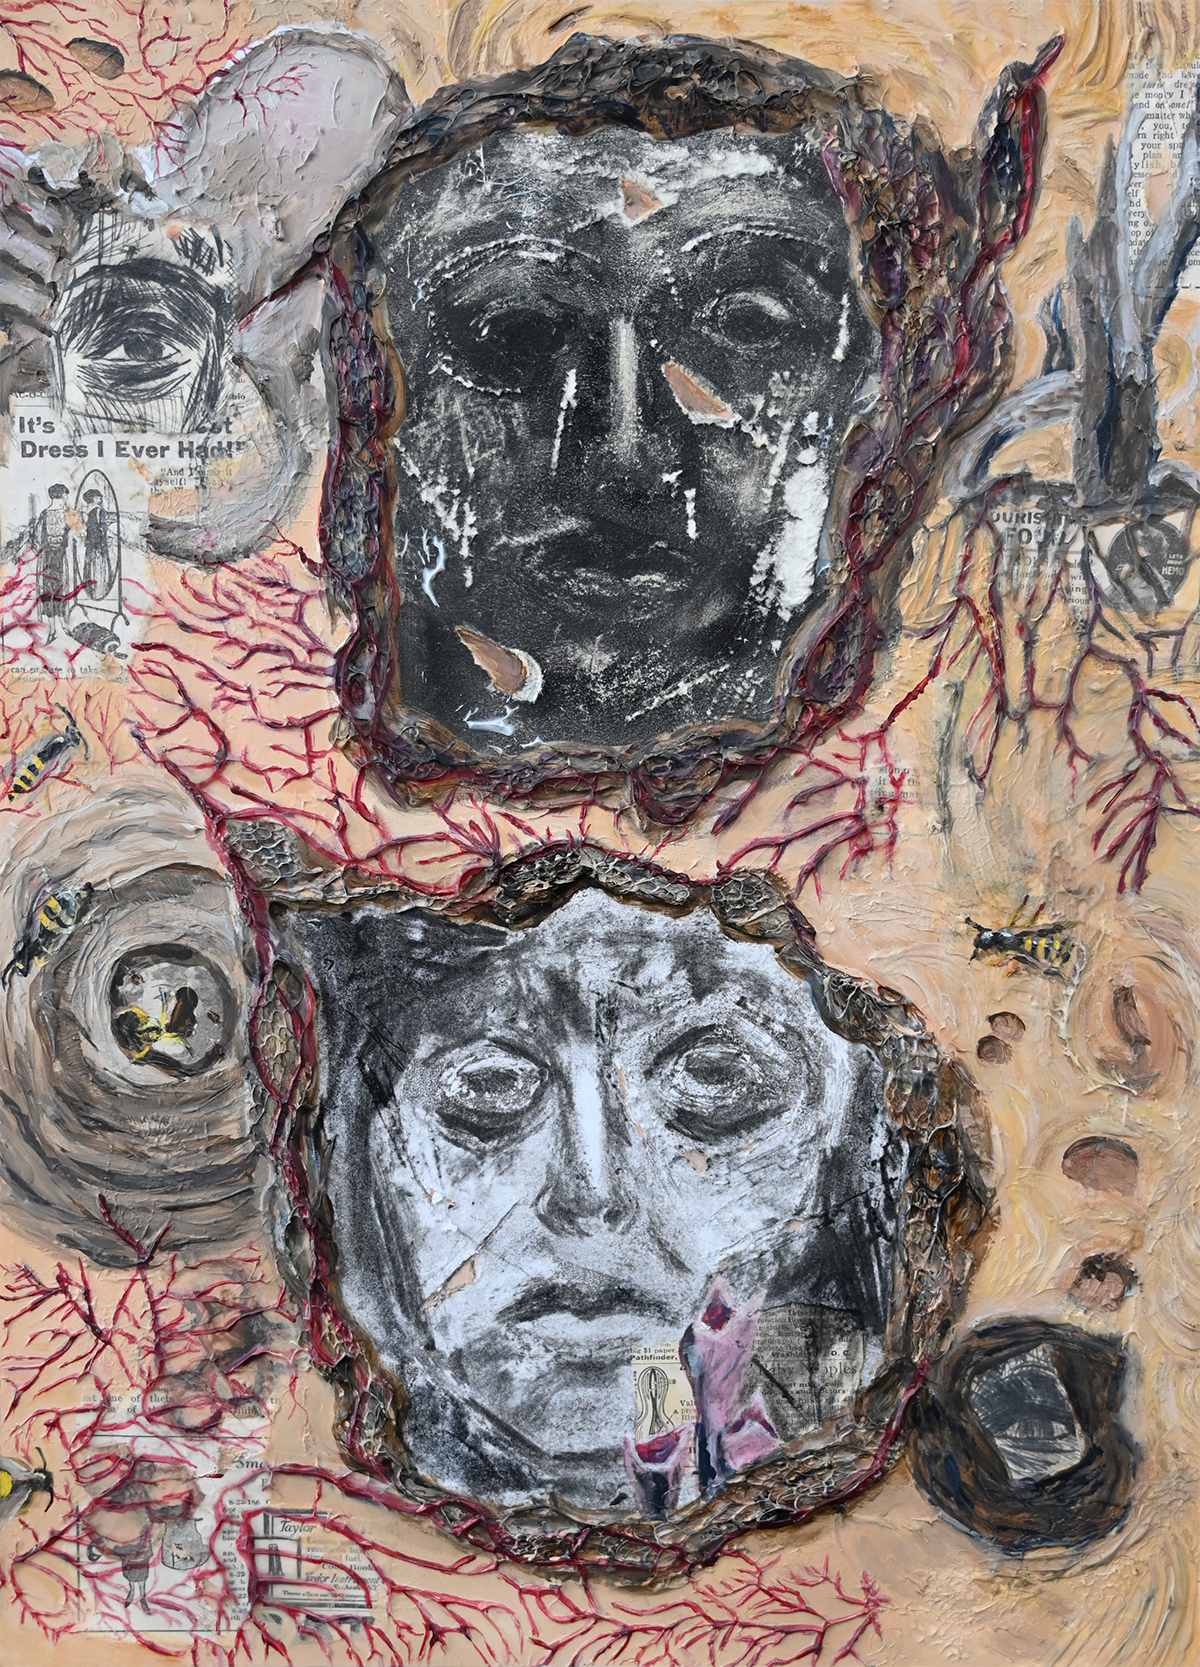 The Nest We Build / Acylic, Monotype, Collage, and Charcoal on wood panel / 16 x 20 inches / 2022